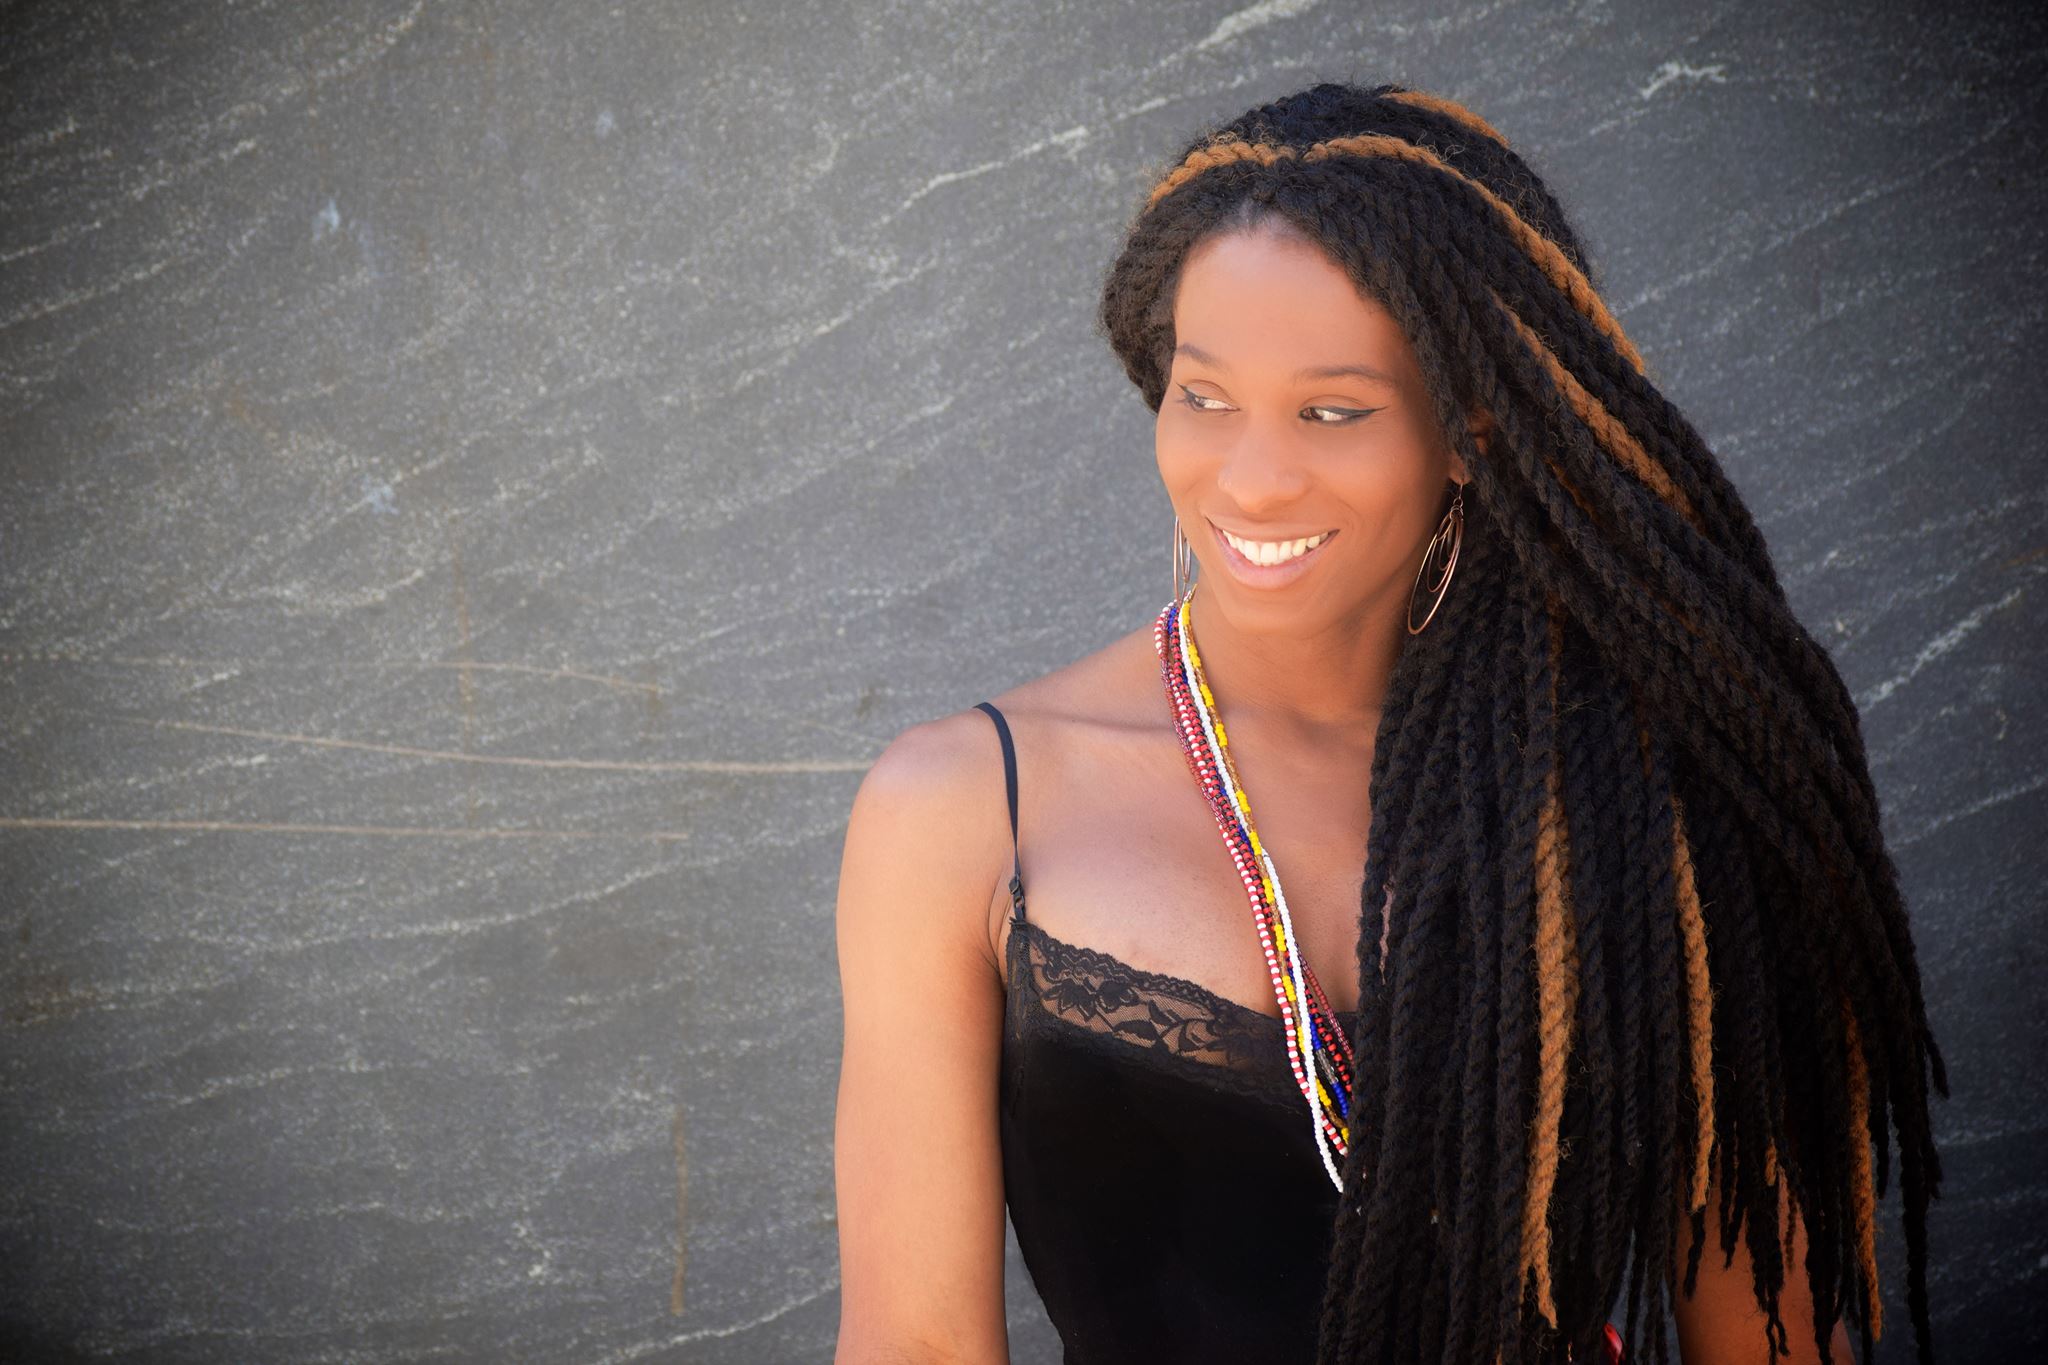 A Black woman with a black tank and long braids looks off to the side smiling.